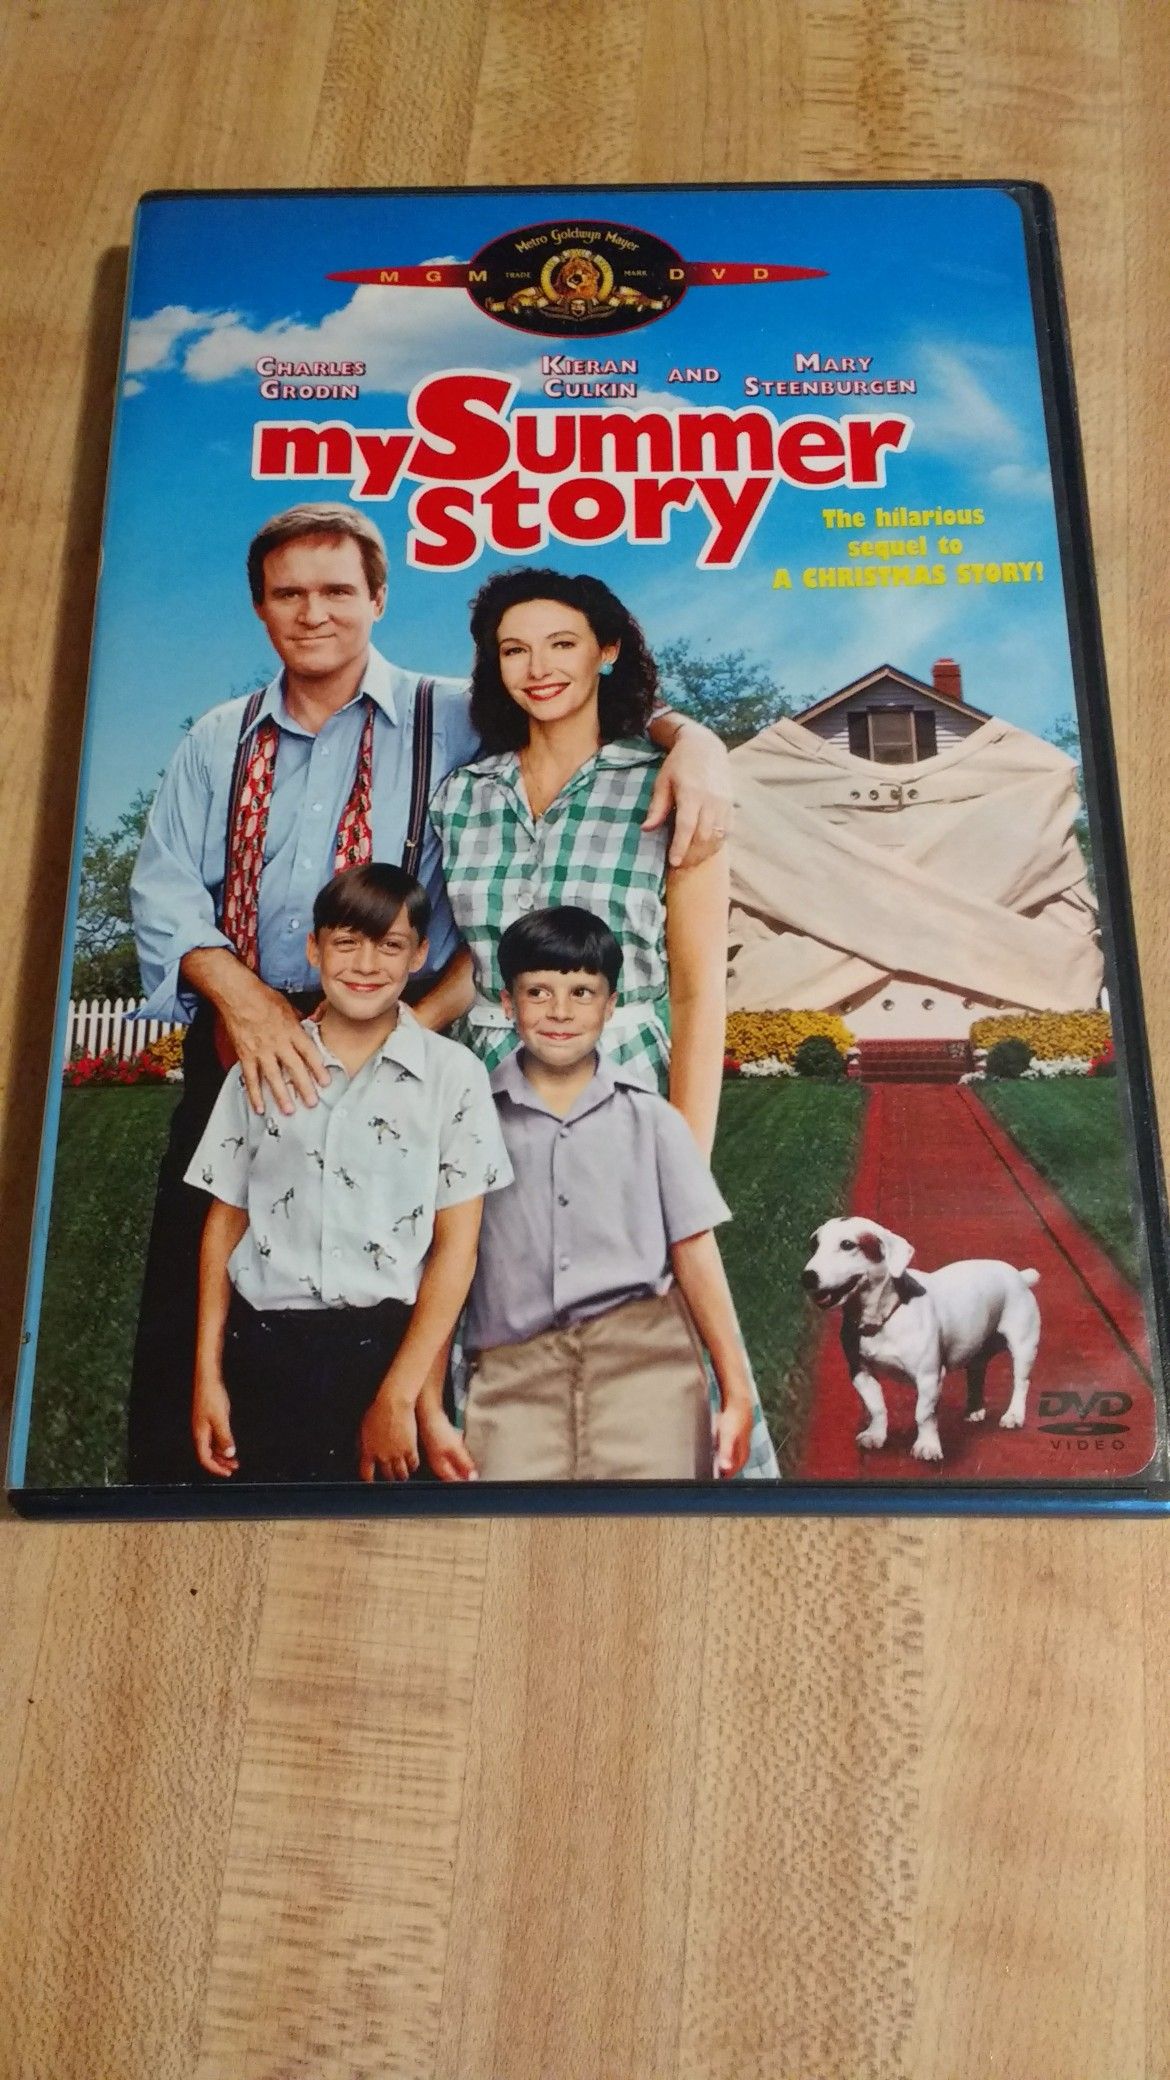 My Summer Story on DVD, sequel to A Christmas Story